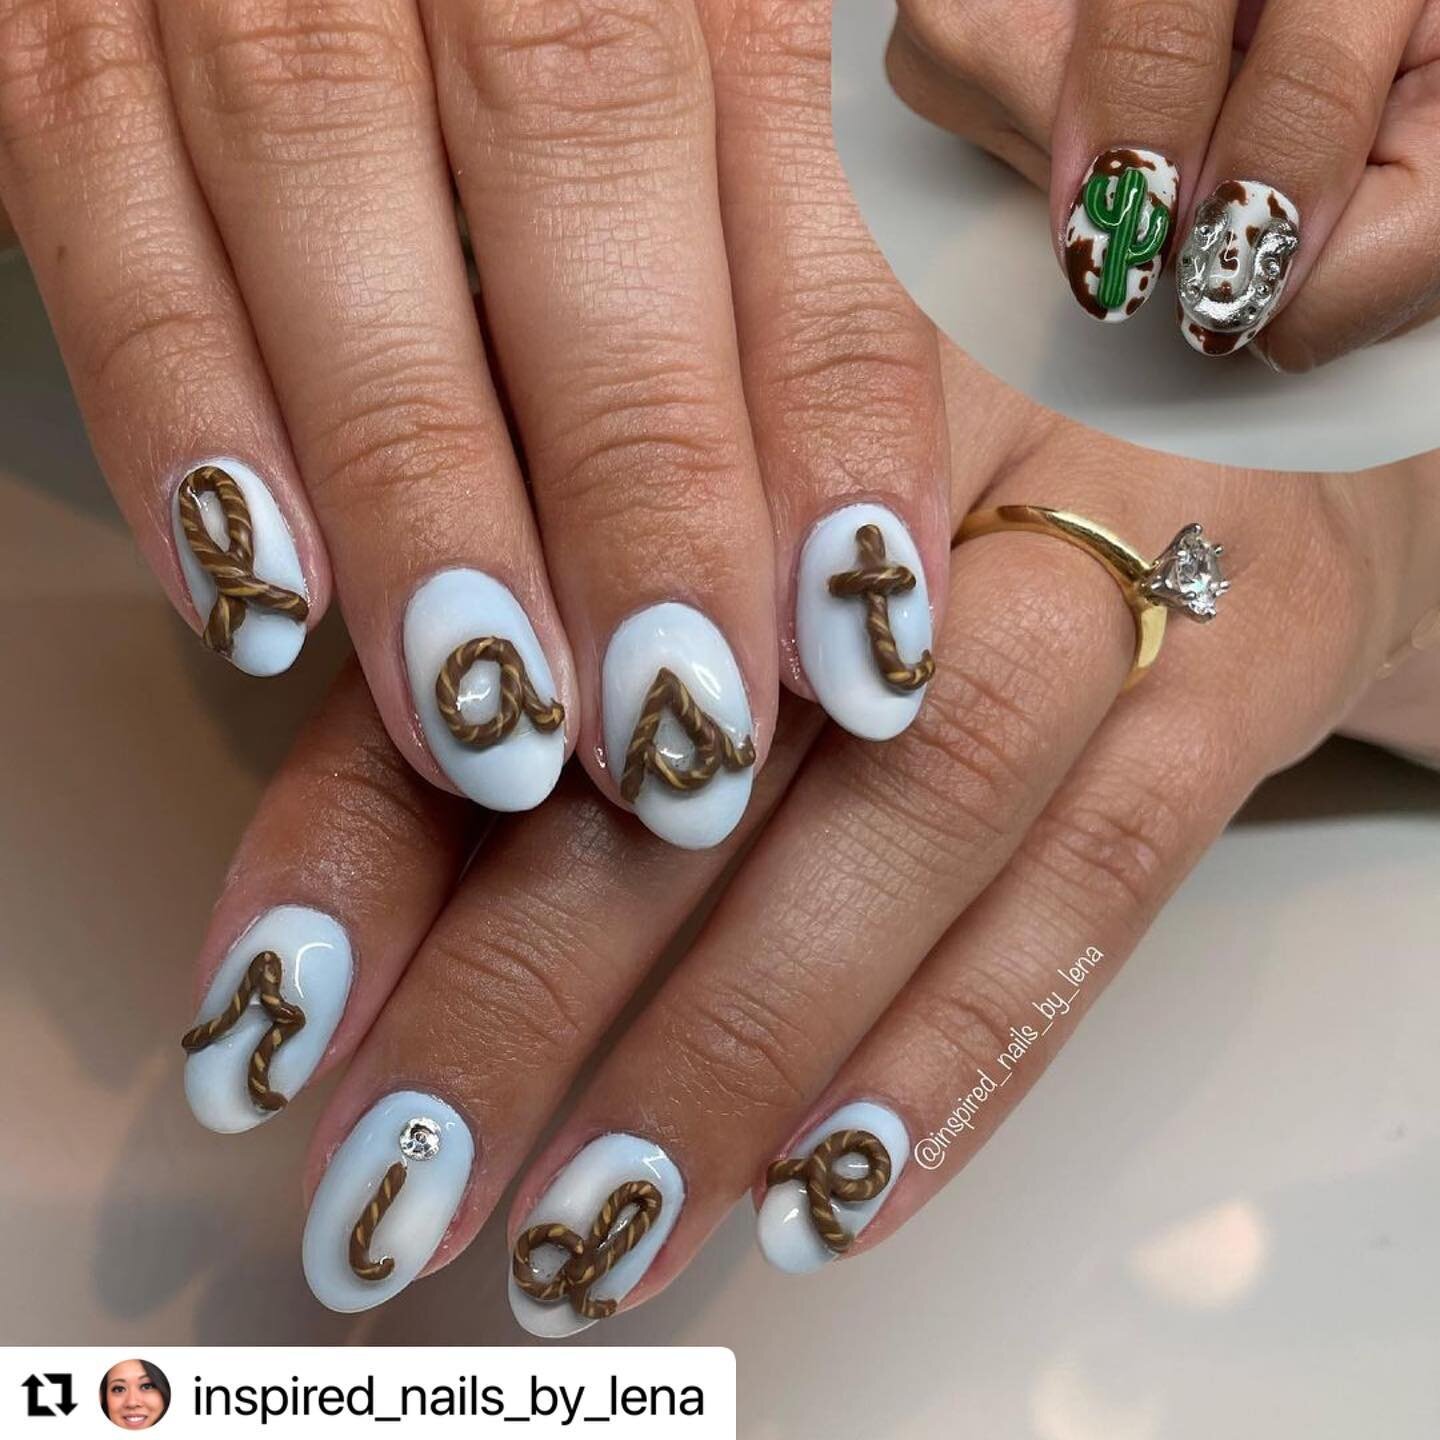 #Repost @inspired_nails_by_lena with @use.repost
・・・
Omg! I had a freaking blast creating this one of a kind masterpiece for @meagansham Sham Antonio.  I hand twisted molding gel into 3d lasso lettering, a horseshoe and a cactus. 🥵 
.
Hard gel + cus